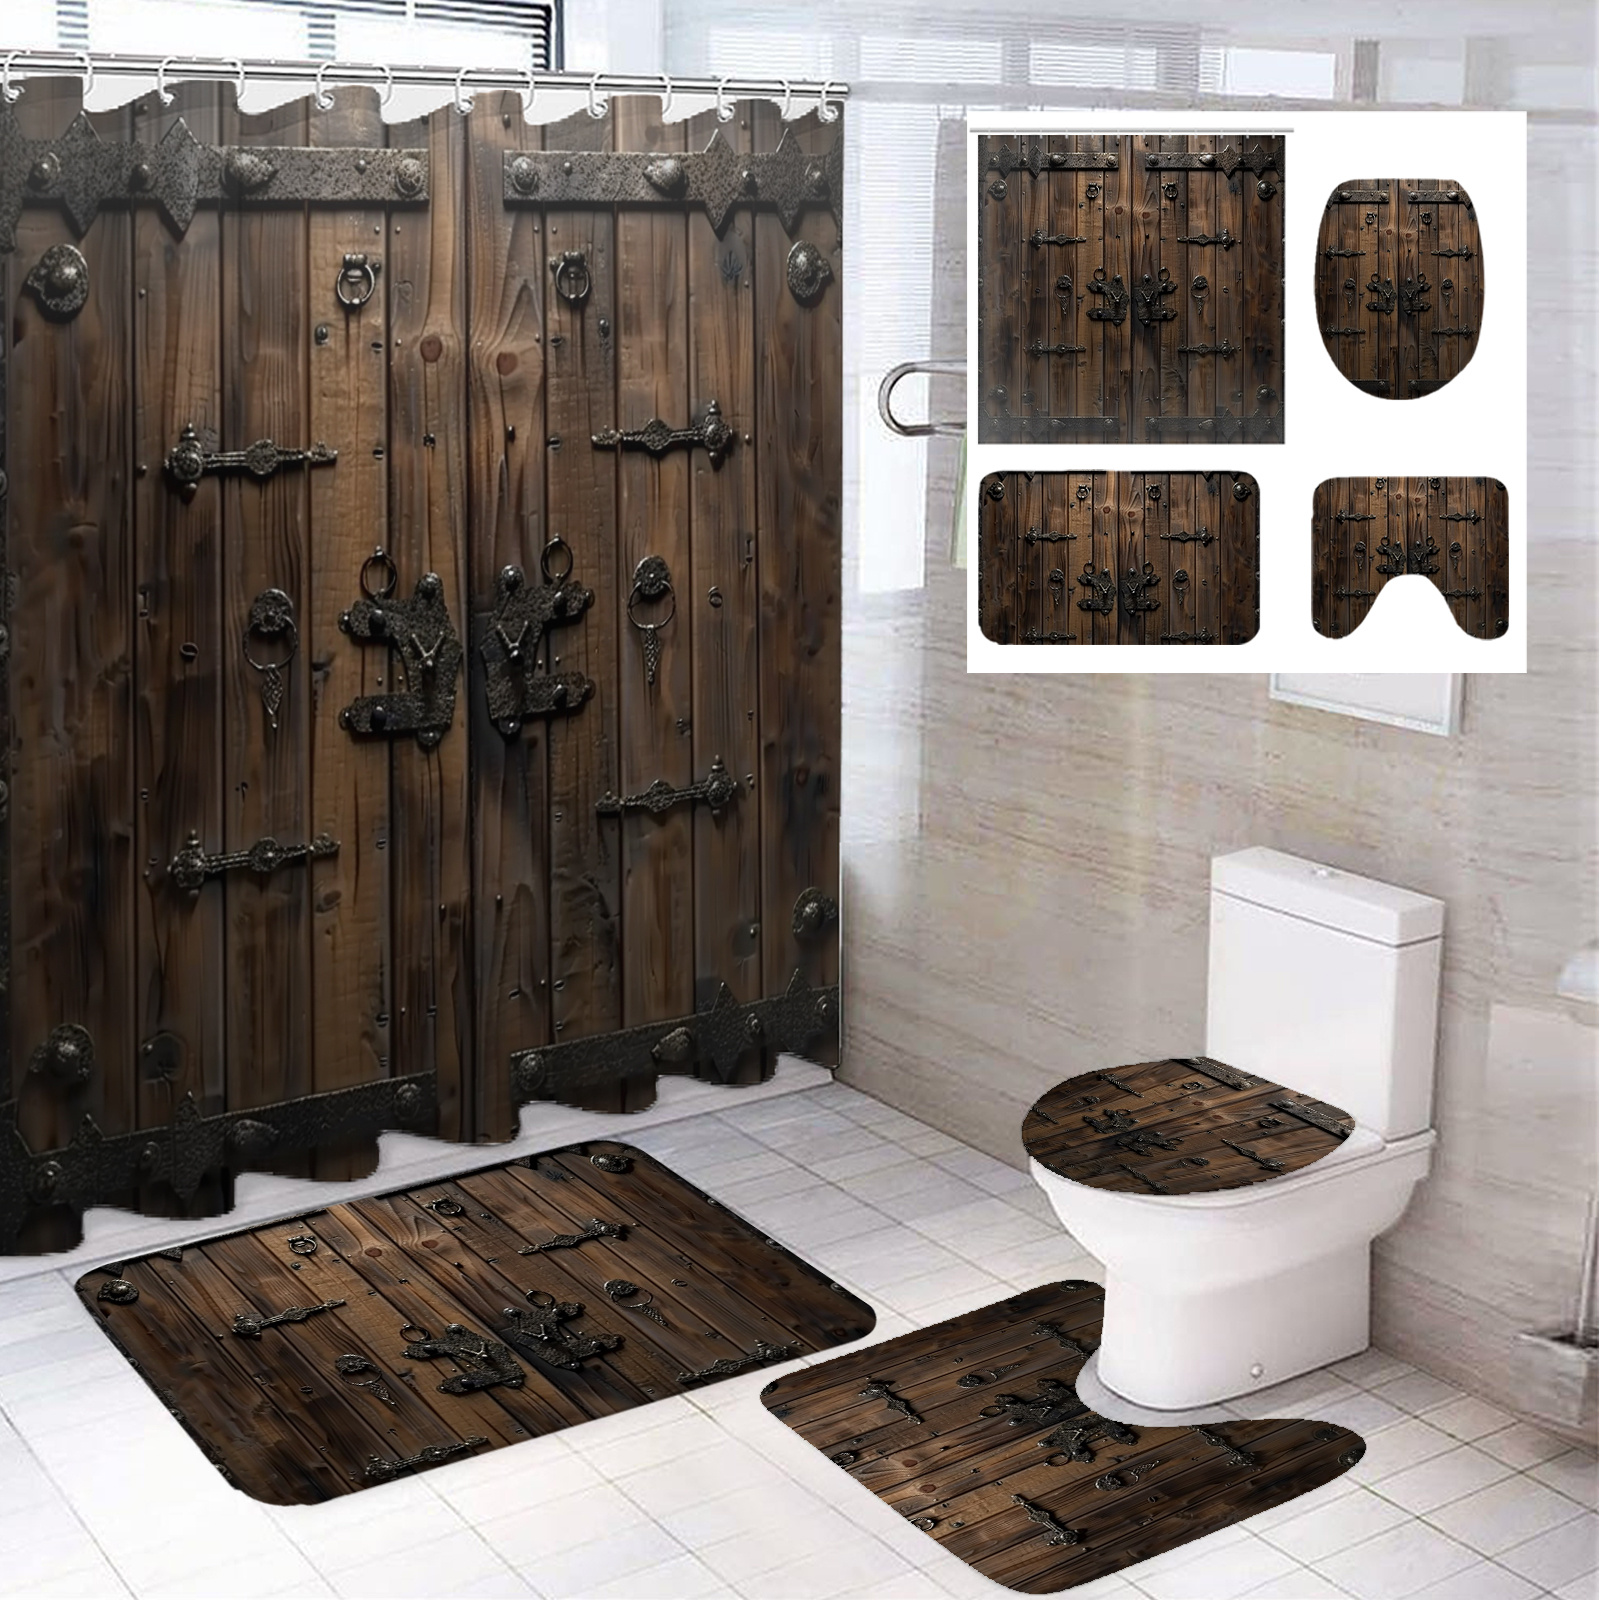 

1/4pcs Wooden Door Pattern Modern Bathroom Decoration, Polyester Bathroom Set With 12 Hooks, Bathroom Non-slip Floor Mat, Toilet Seat Cover And U-shaped Mat Home Decoration 71*71in